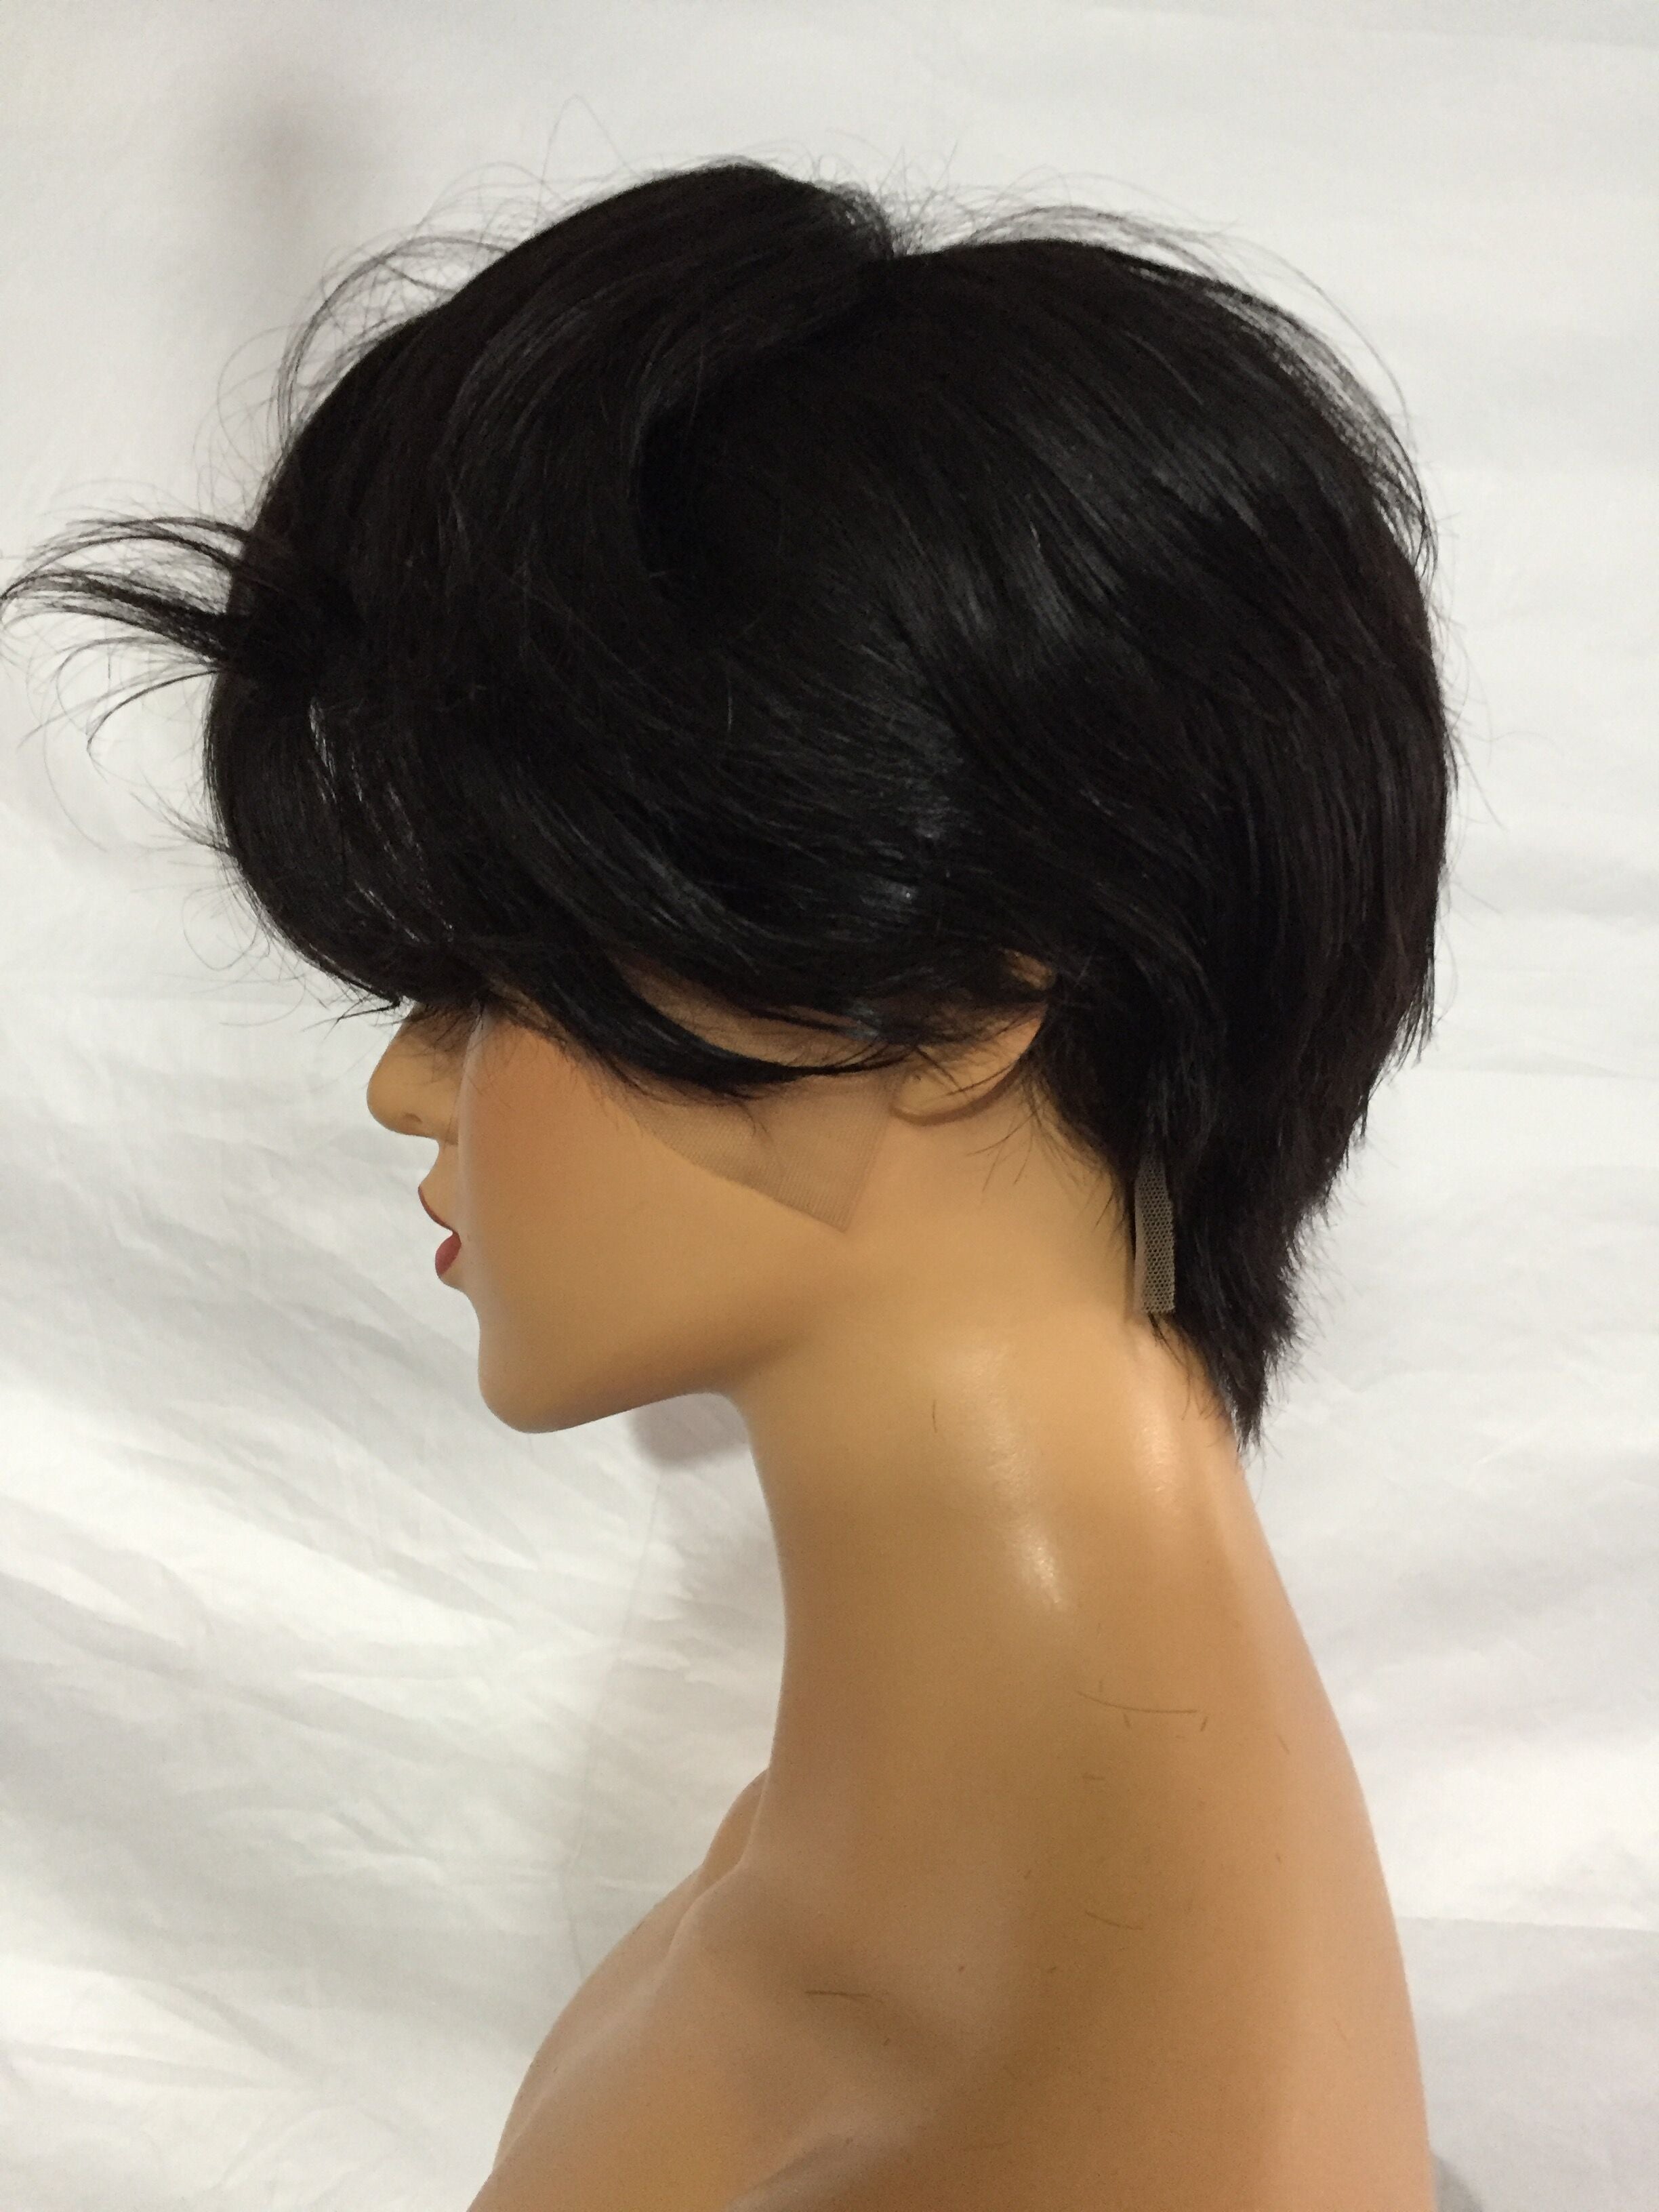 Pixie Wig lace short cut Wigs real Human Hair Wig